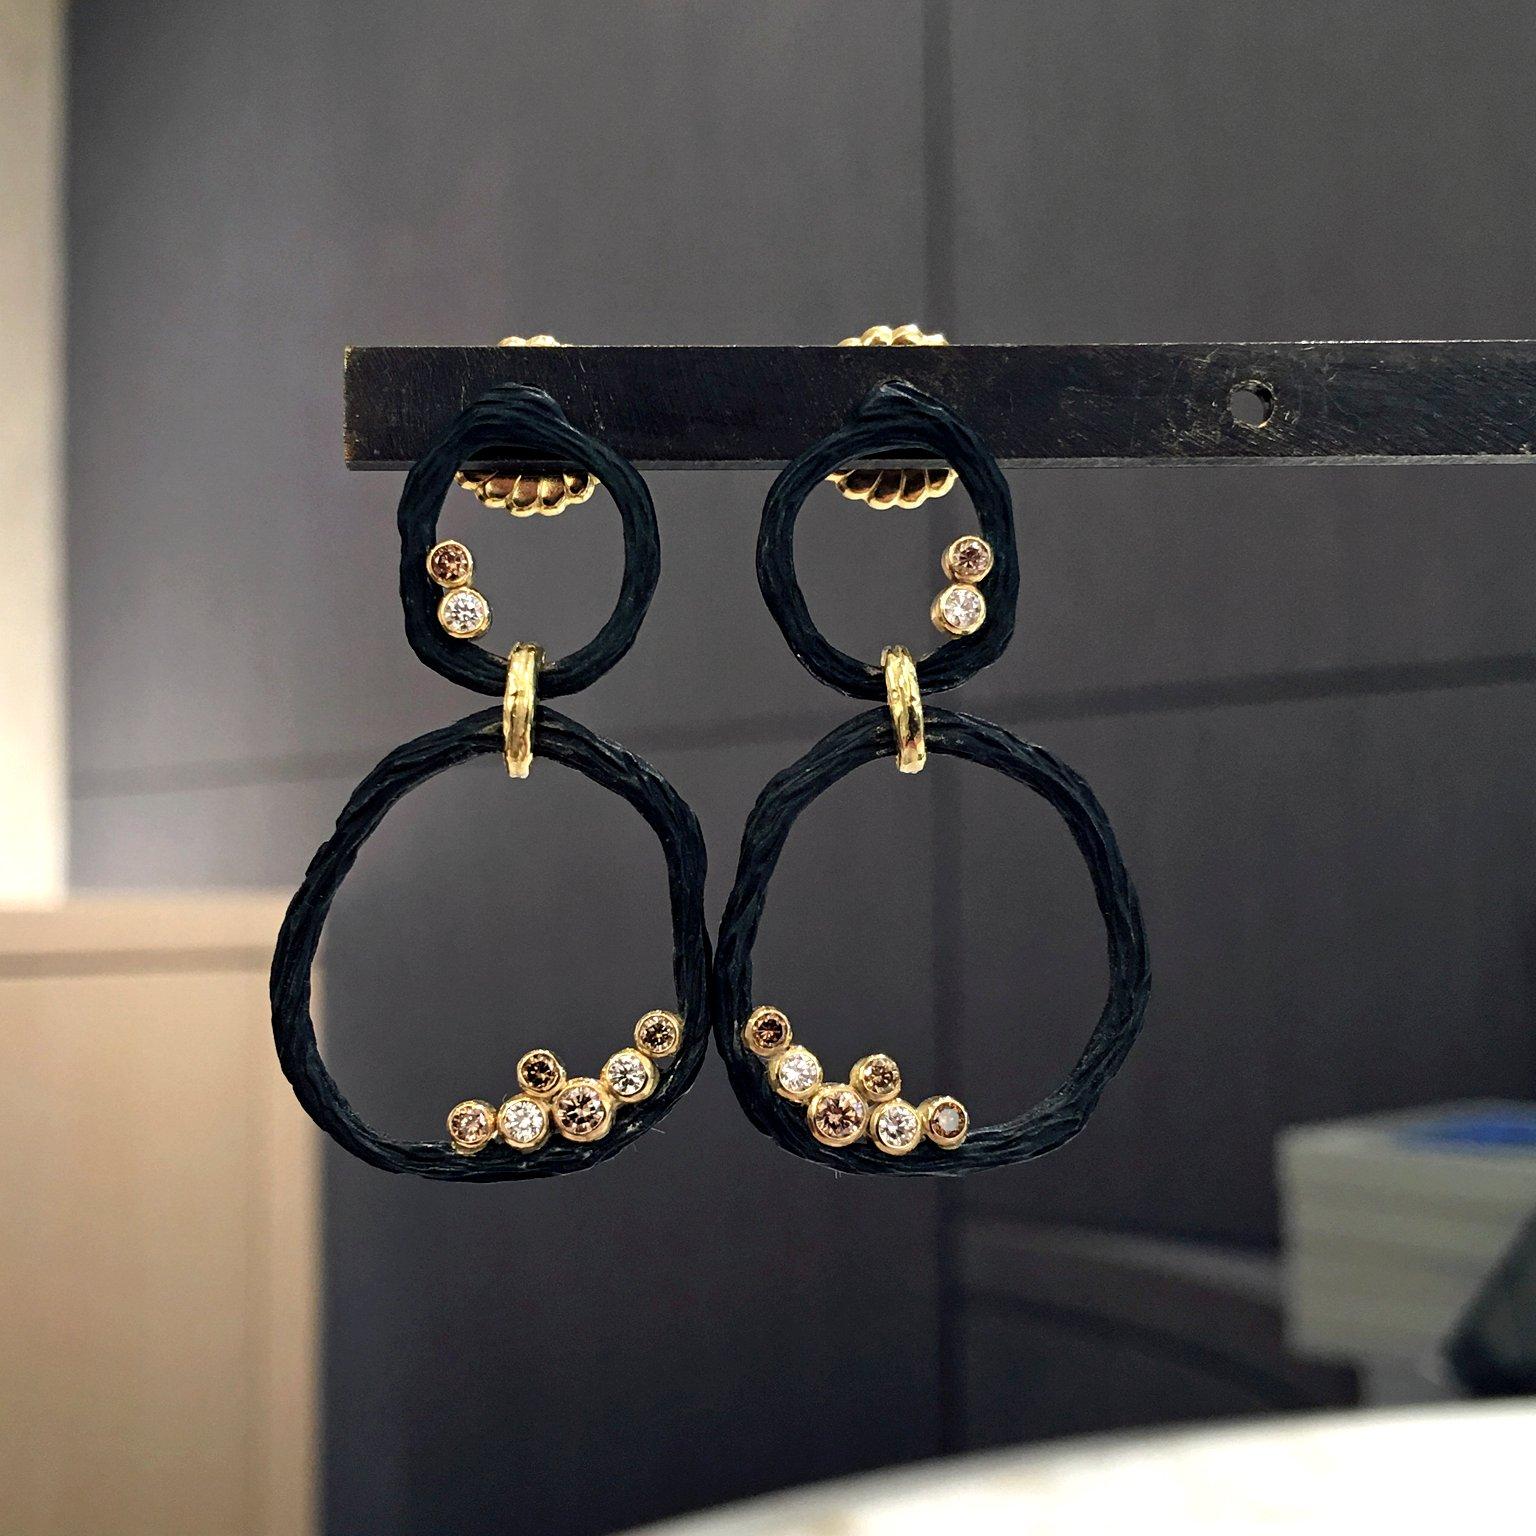 Double Circle Earrings handcrafted in pebble-finished black steel with 0.34 total carats of assorted size white and cognac round brilliant-cut diamonds bezel set in 18k yellow gold with 18k yellow gold pebble-finished links, and 18k posts and backs.